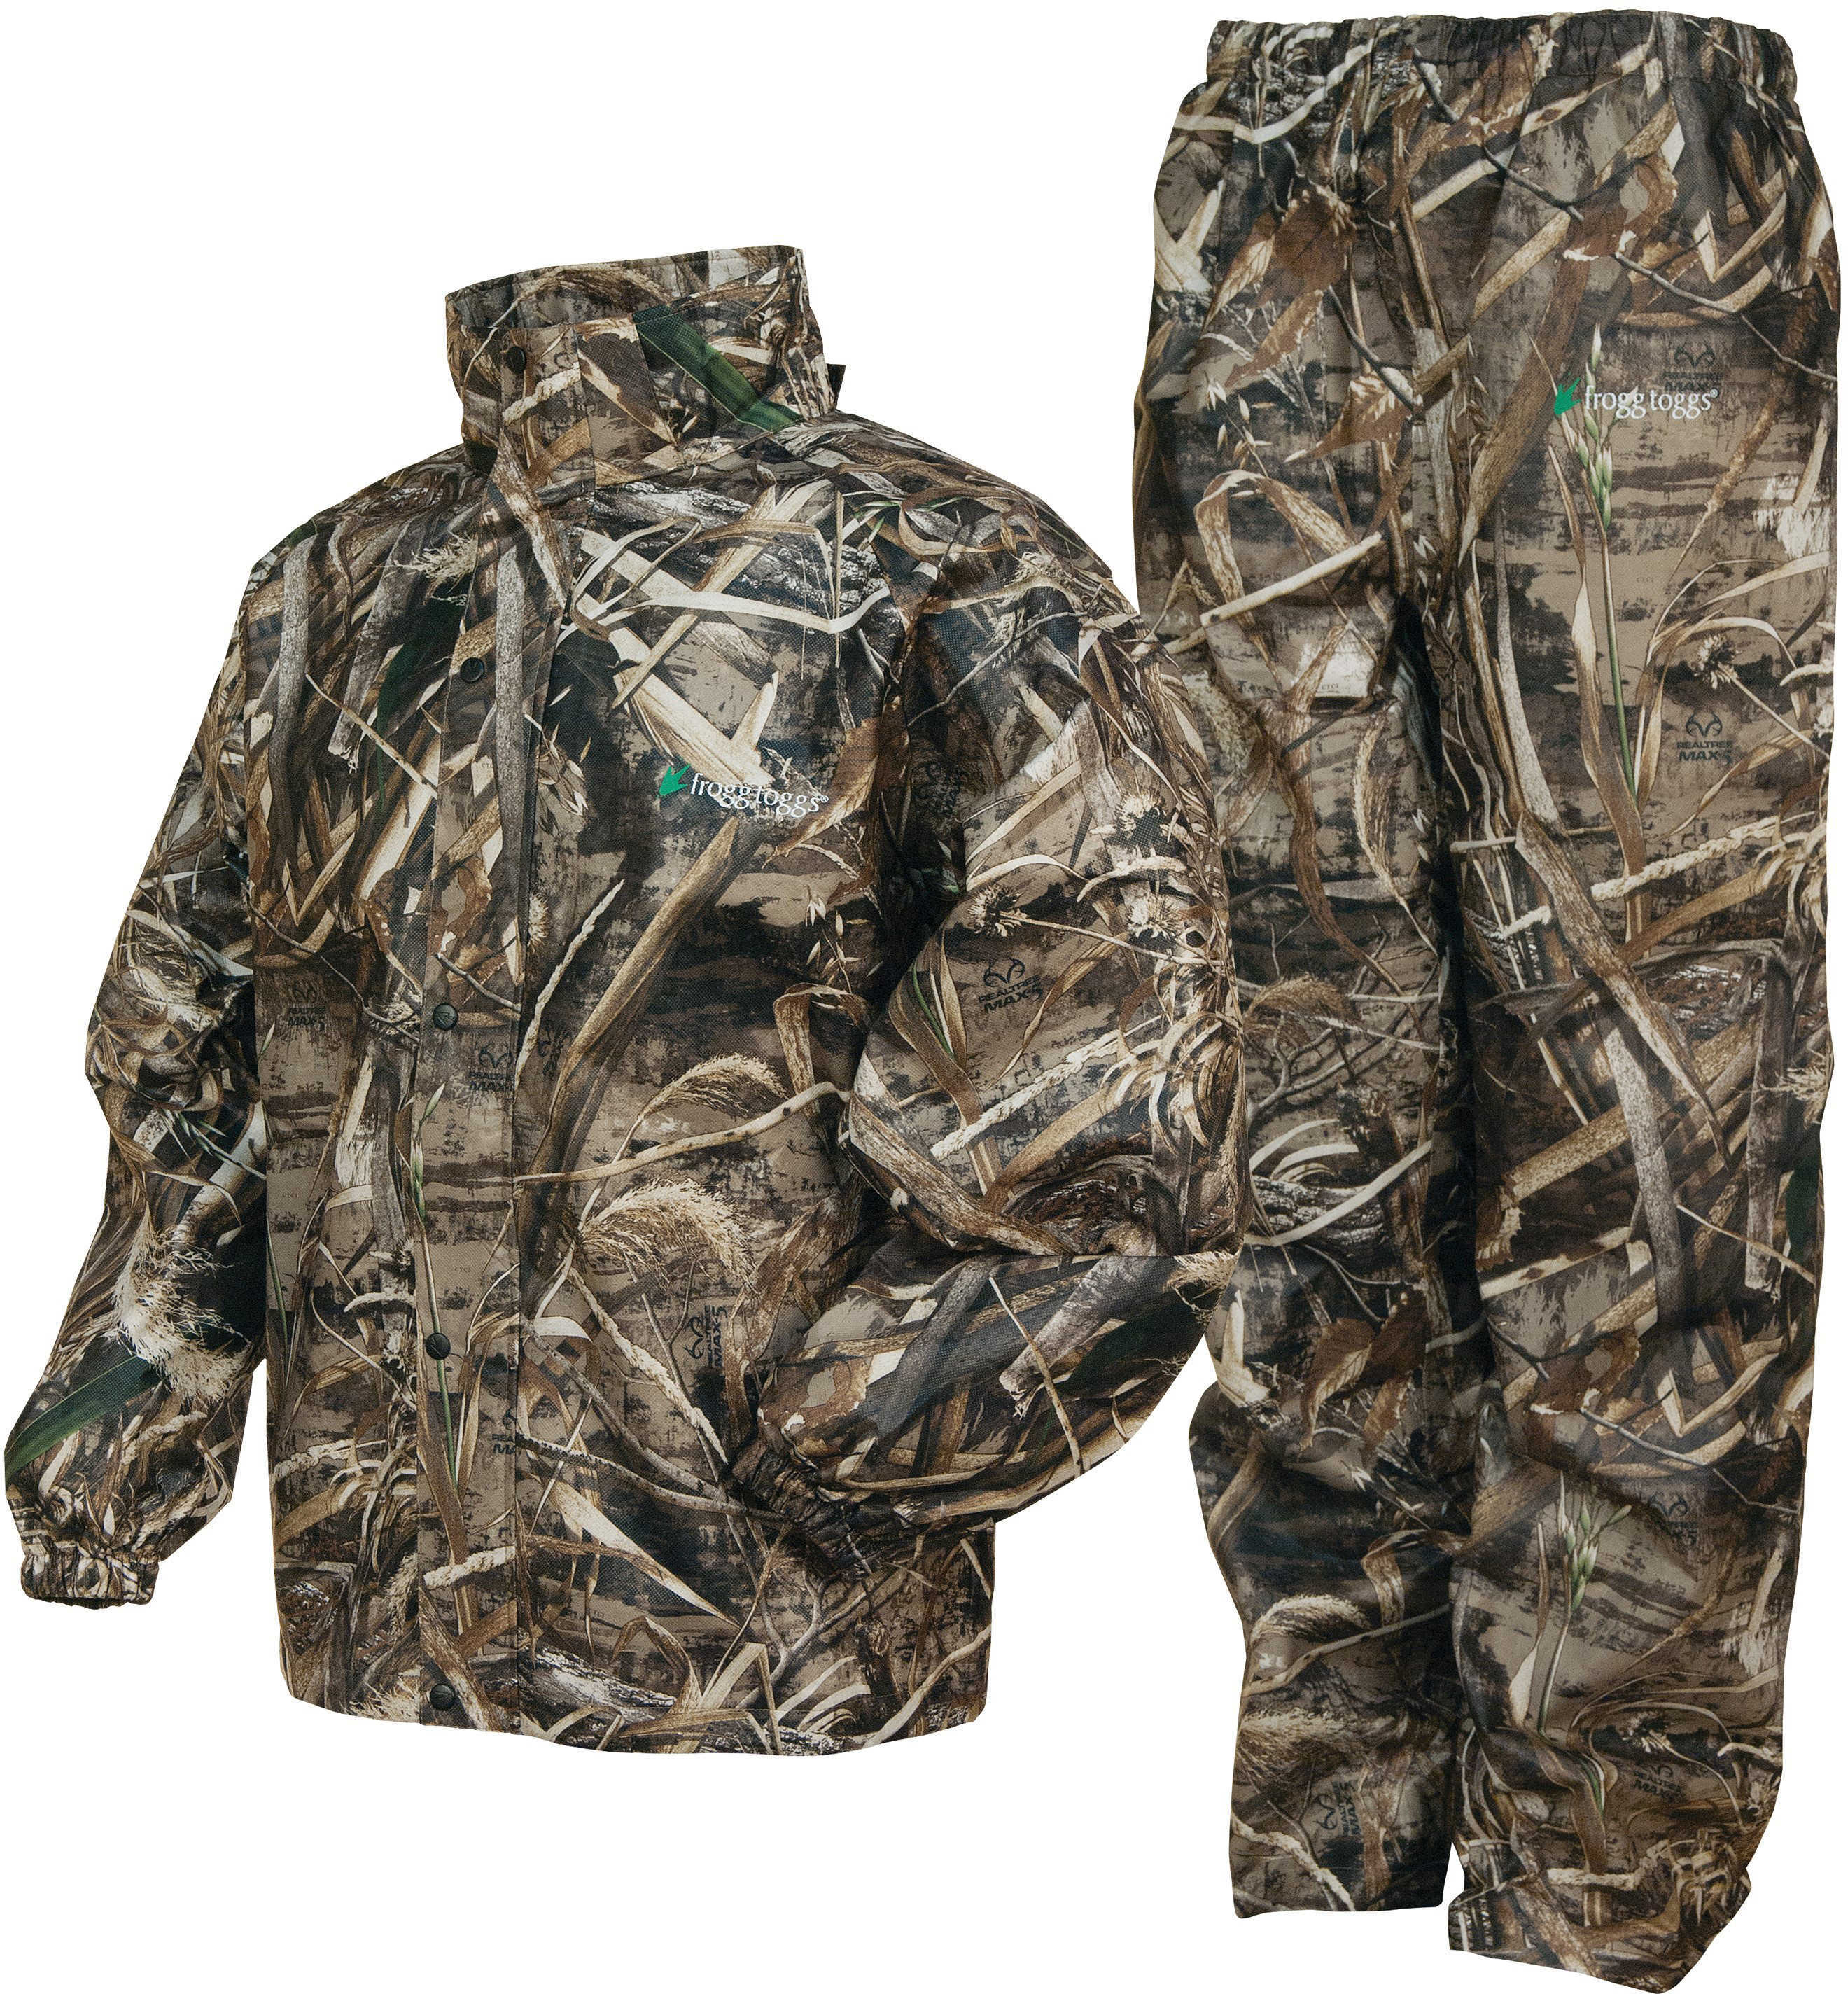 Frogg Toggs All Sports Camo Suit Max 5 X-Large Md: AS1310-56XL